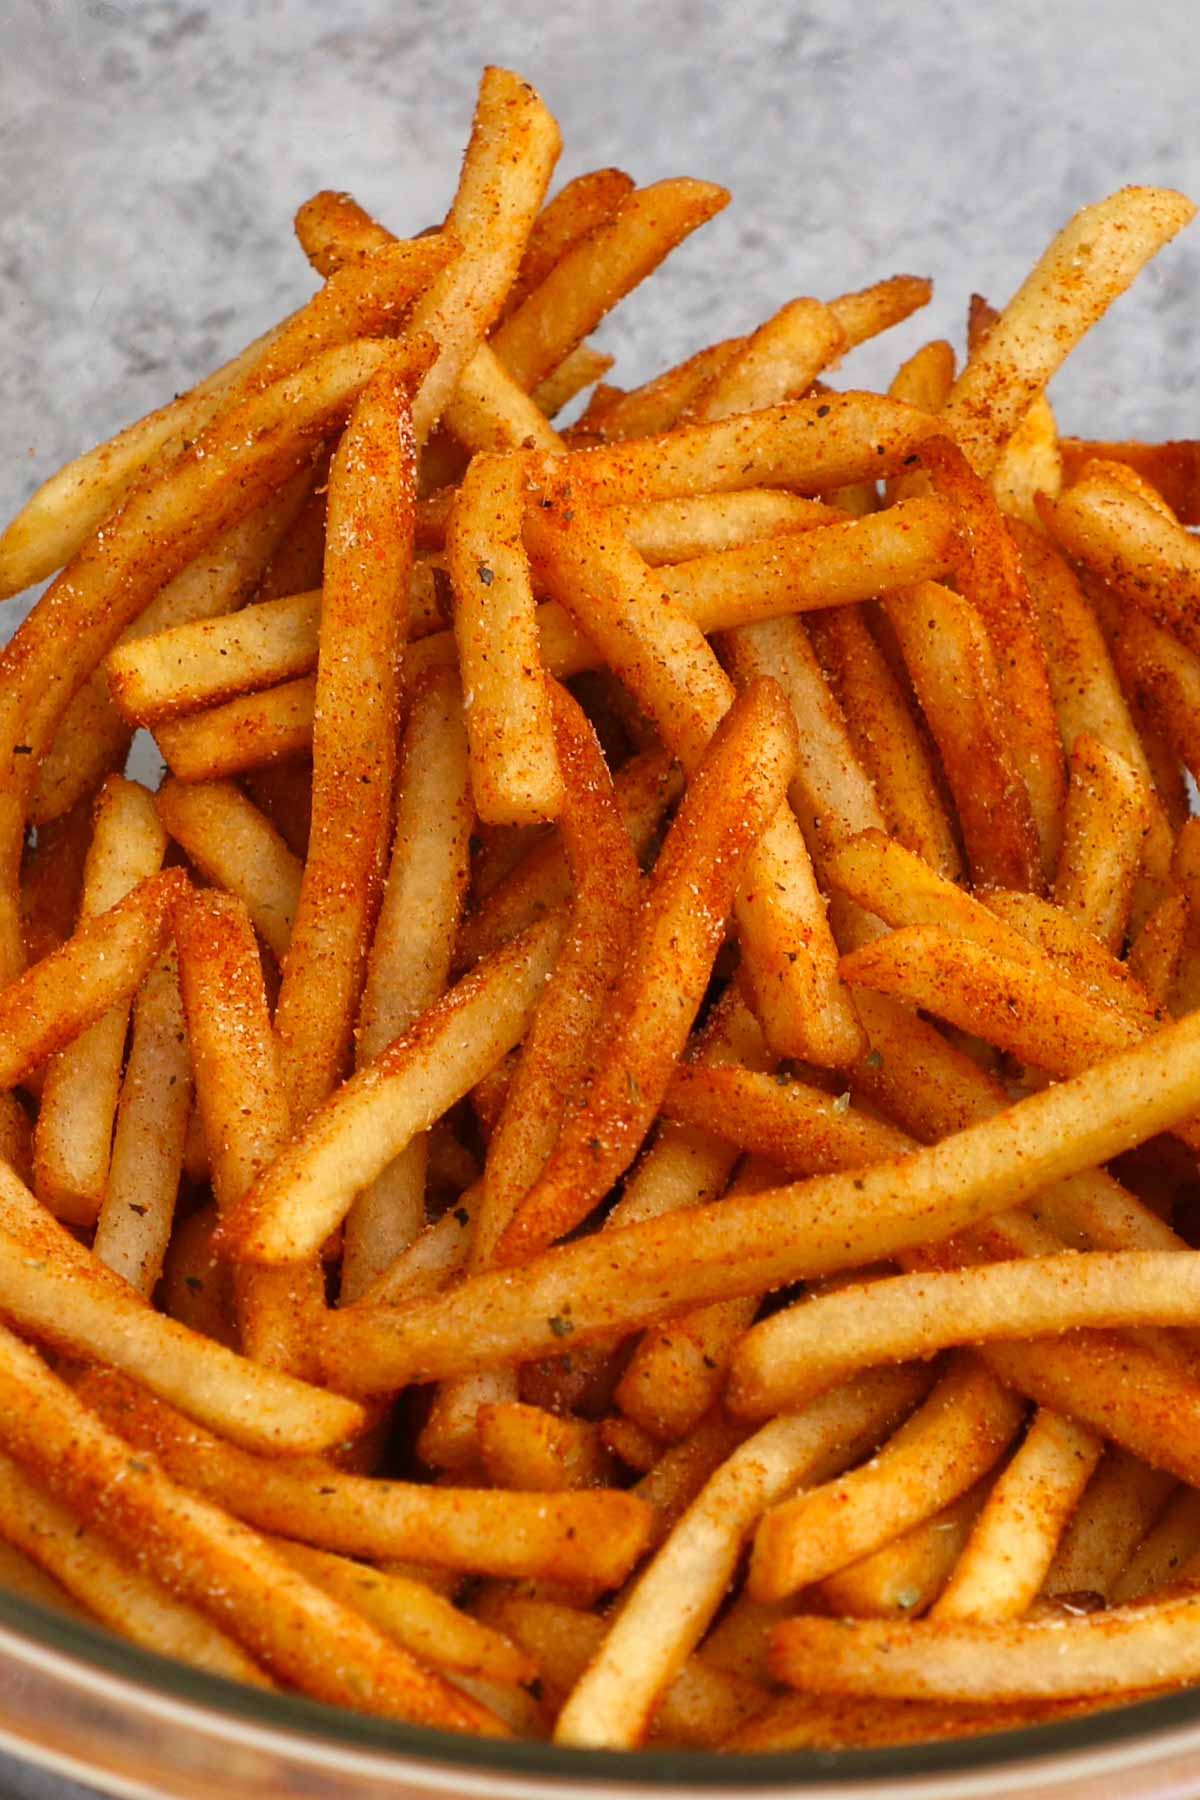 These homemade copycat Popeyes’ Cajun Fries are crispy on the outside, fluffy on the inside, with the perfect kick. They taste the same if not better than the fast-food French fry. What distinguishes these Popeyes Fries is an irresistible mix of seasonings for an authentic Cajun treat.